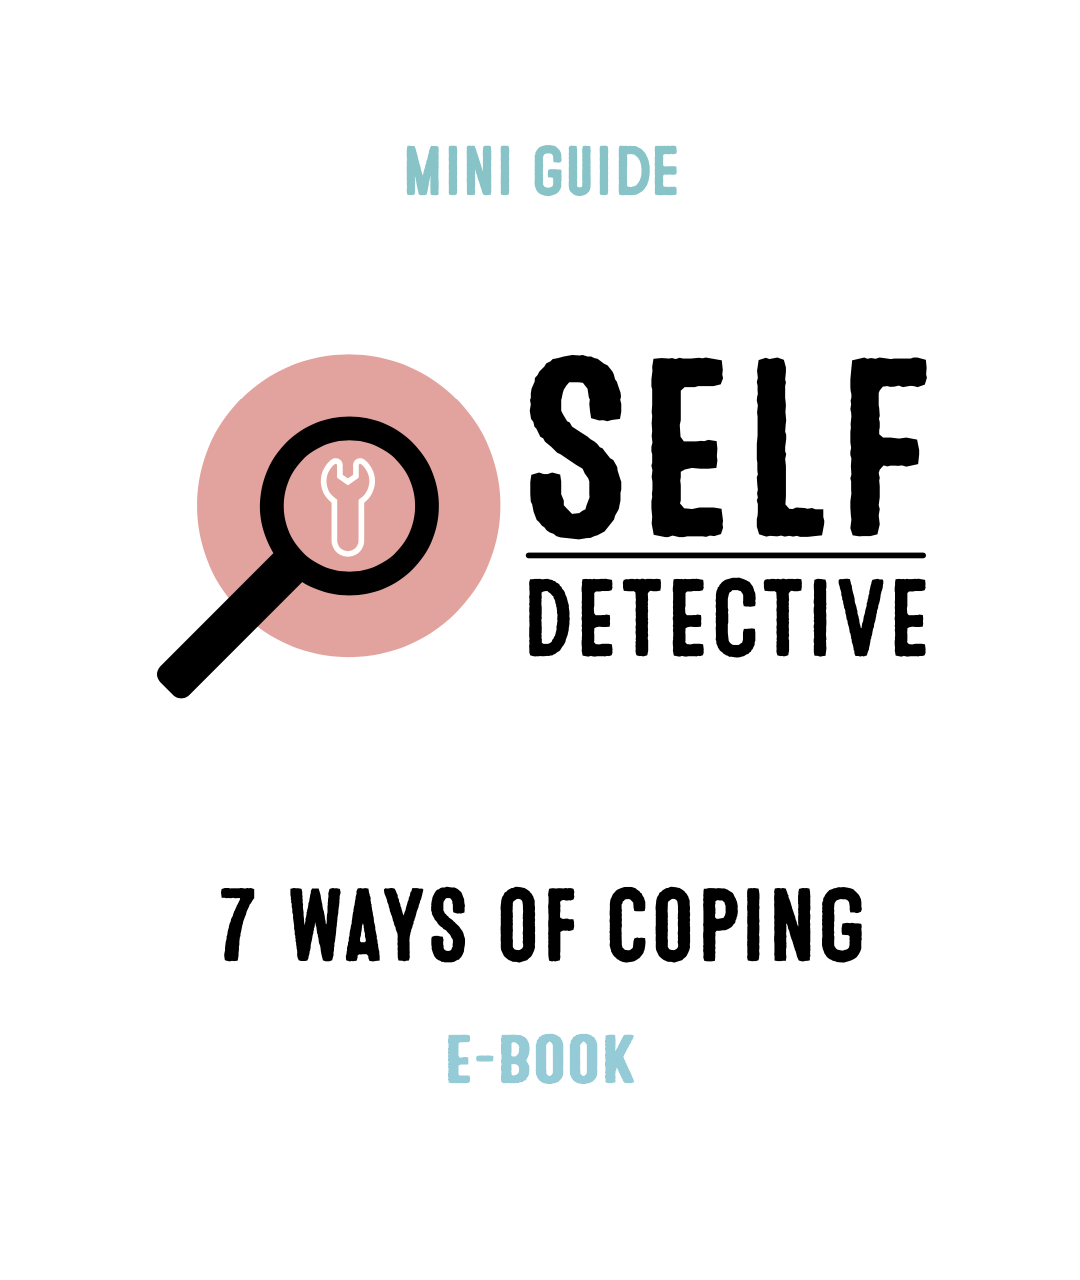 7 Ways of Coping (E-book version)